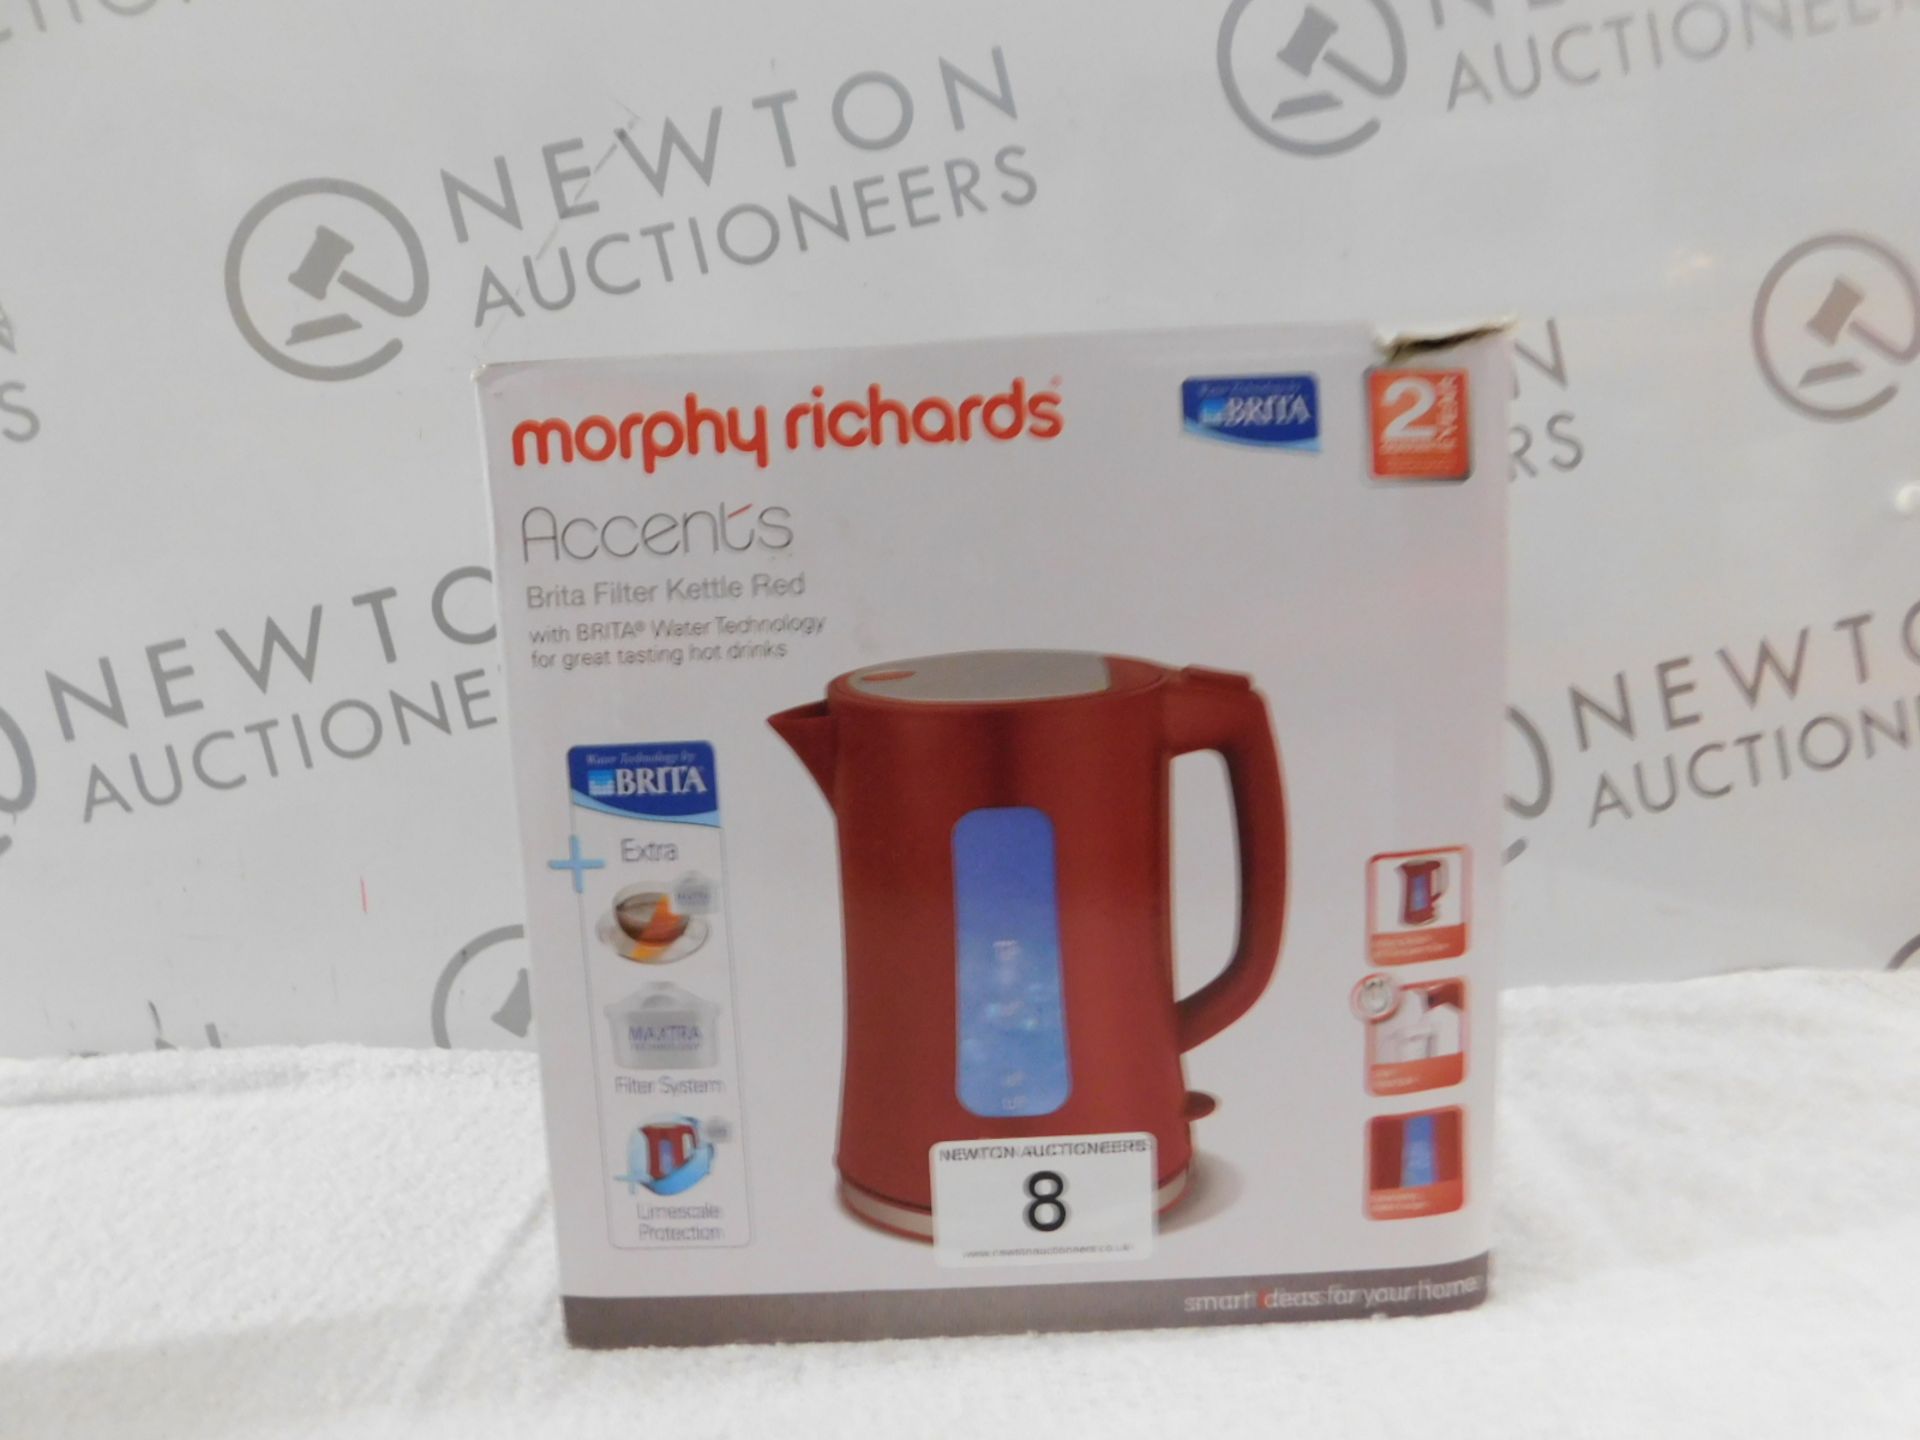 1 BOXED MORPHY RICHARDS ACCENTS BRITA FILTER RED KETTLE RRP £49.99